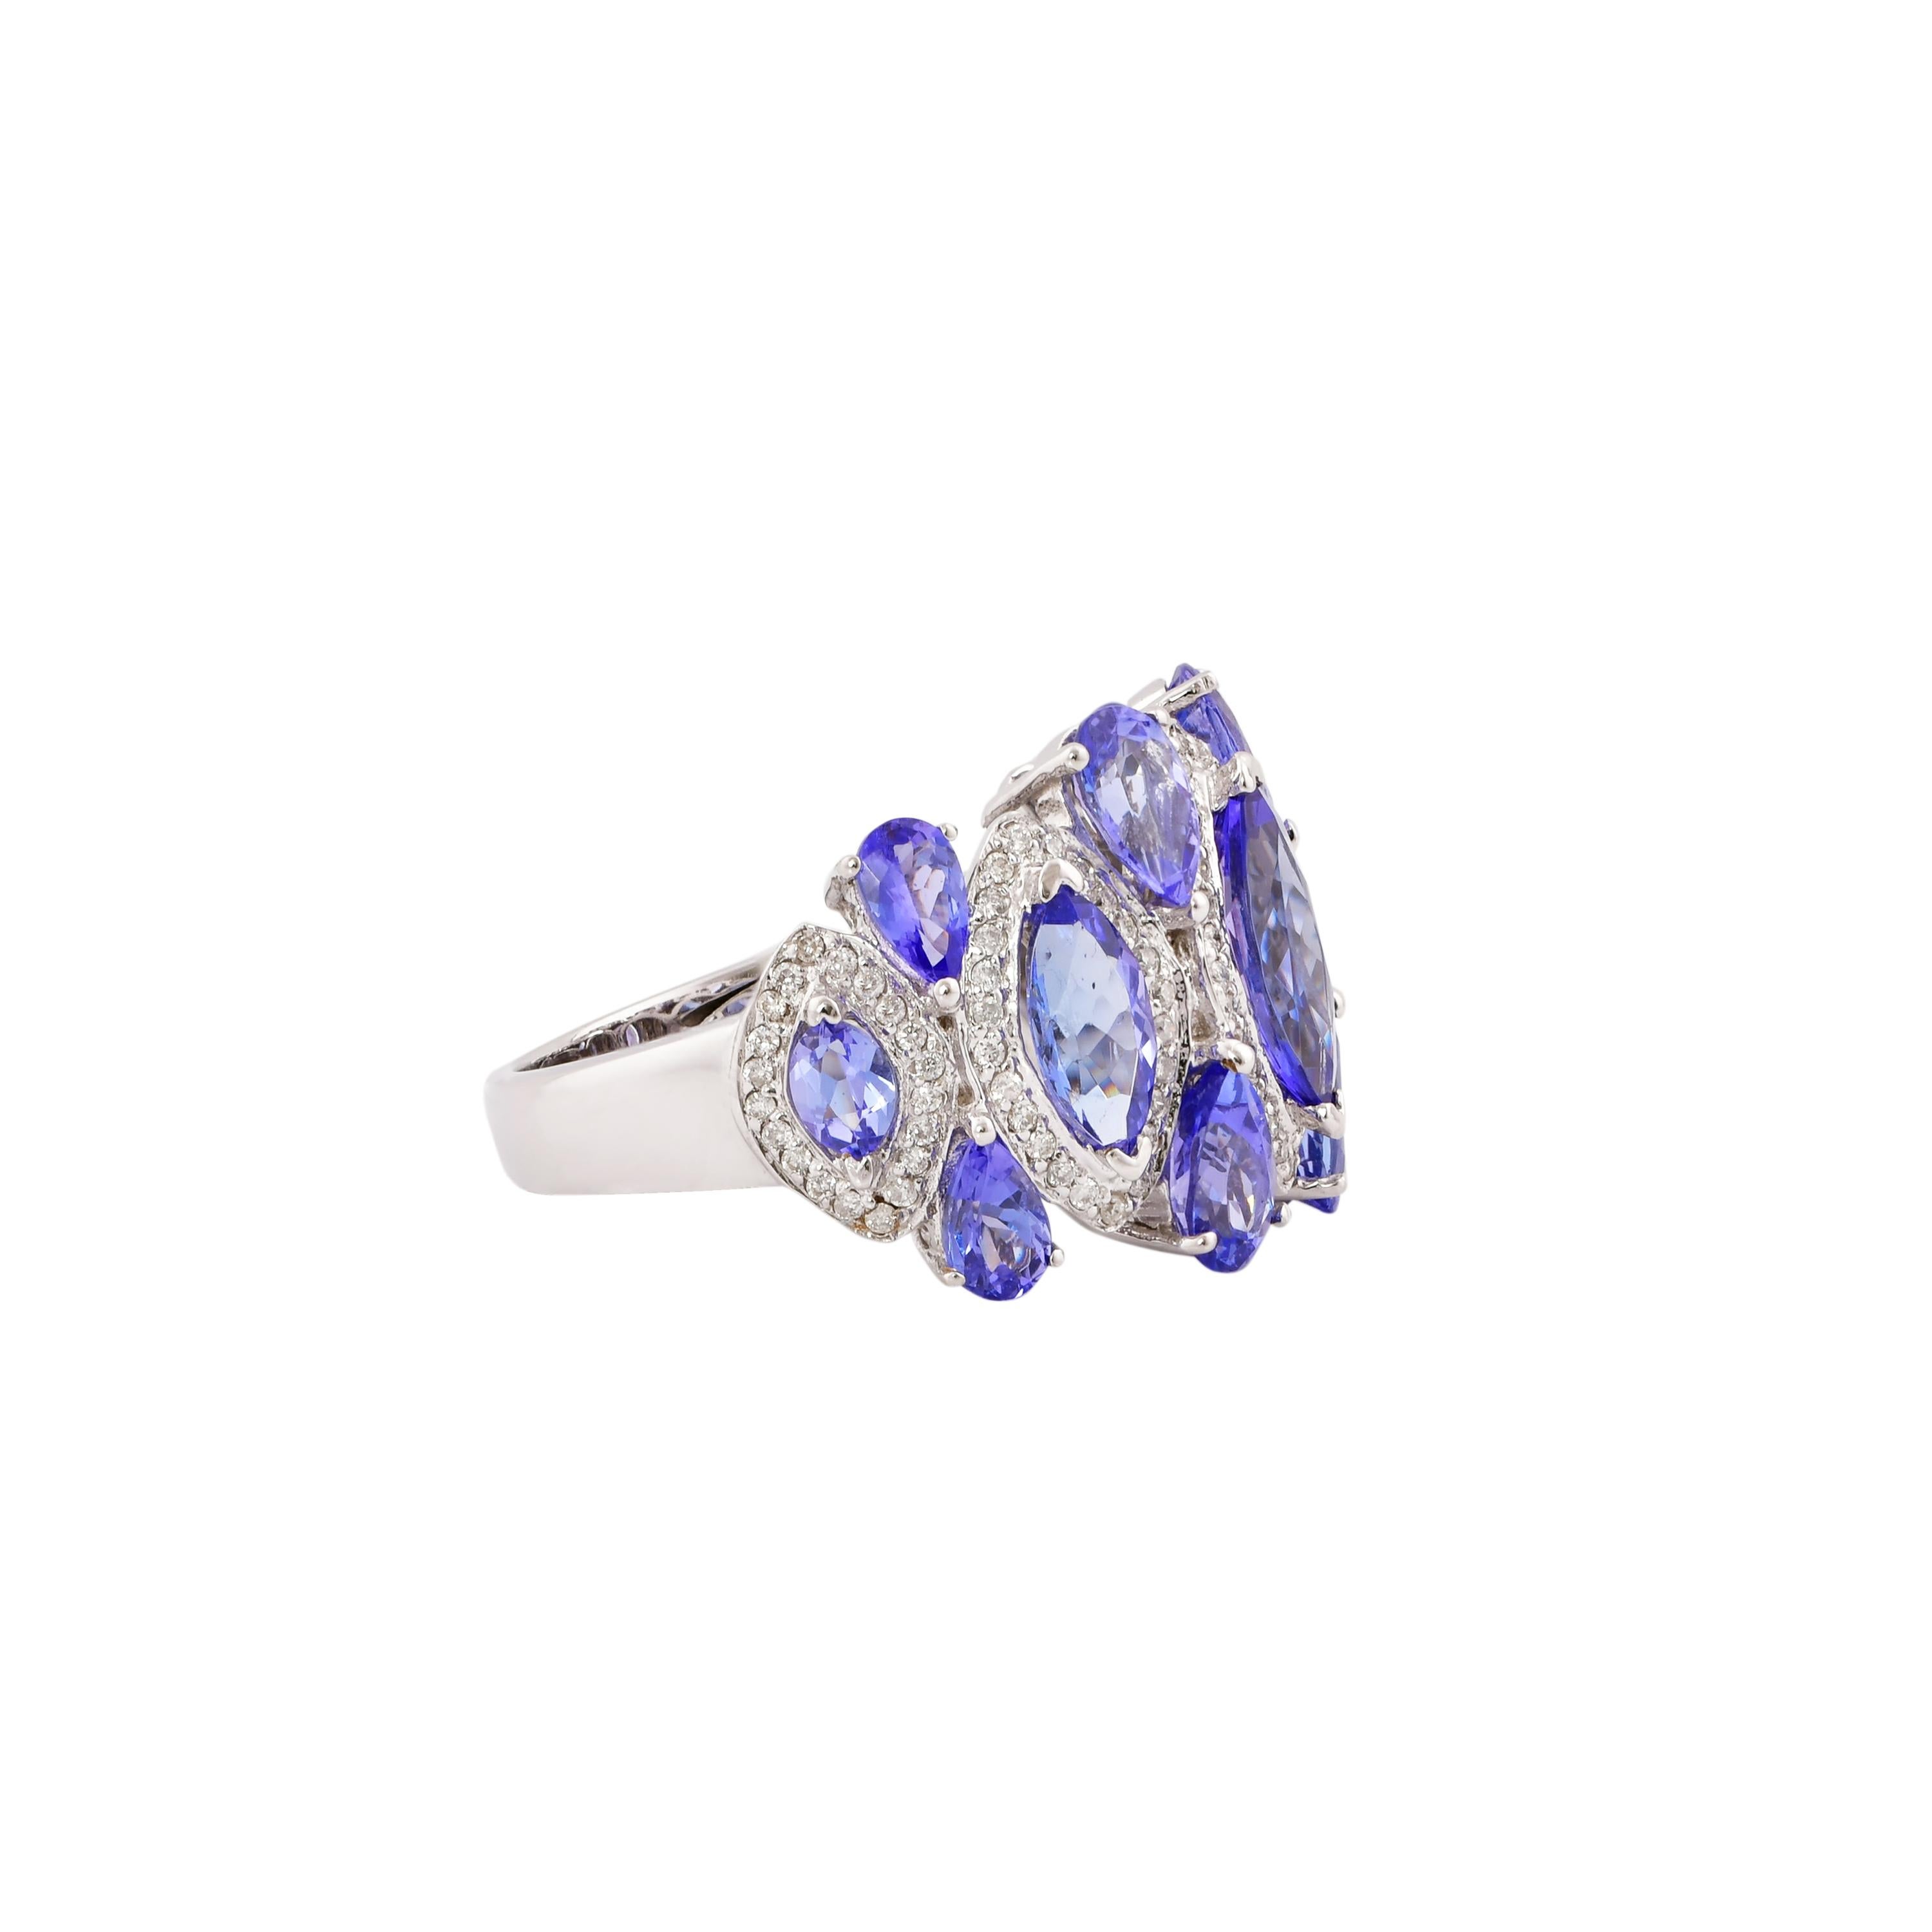 Sunita Nahata presents a collection of fancy cocktail rings with gorgeous gemstones. This ring uniquely pairs pear and marquise shaped tanzanites accented with diamonds. The banded design makes the a striking yet subtle cocktail ring that will